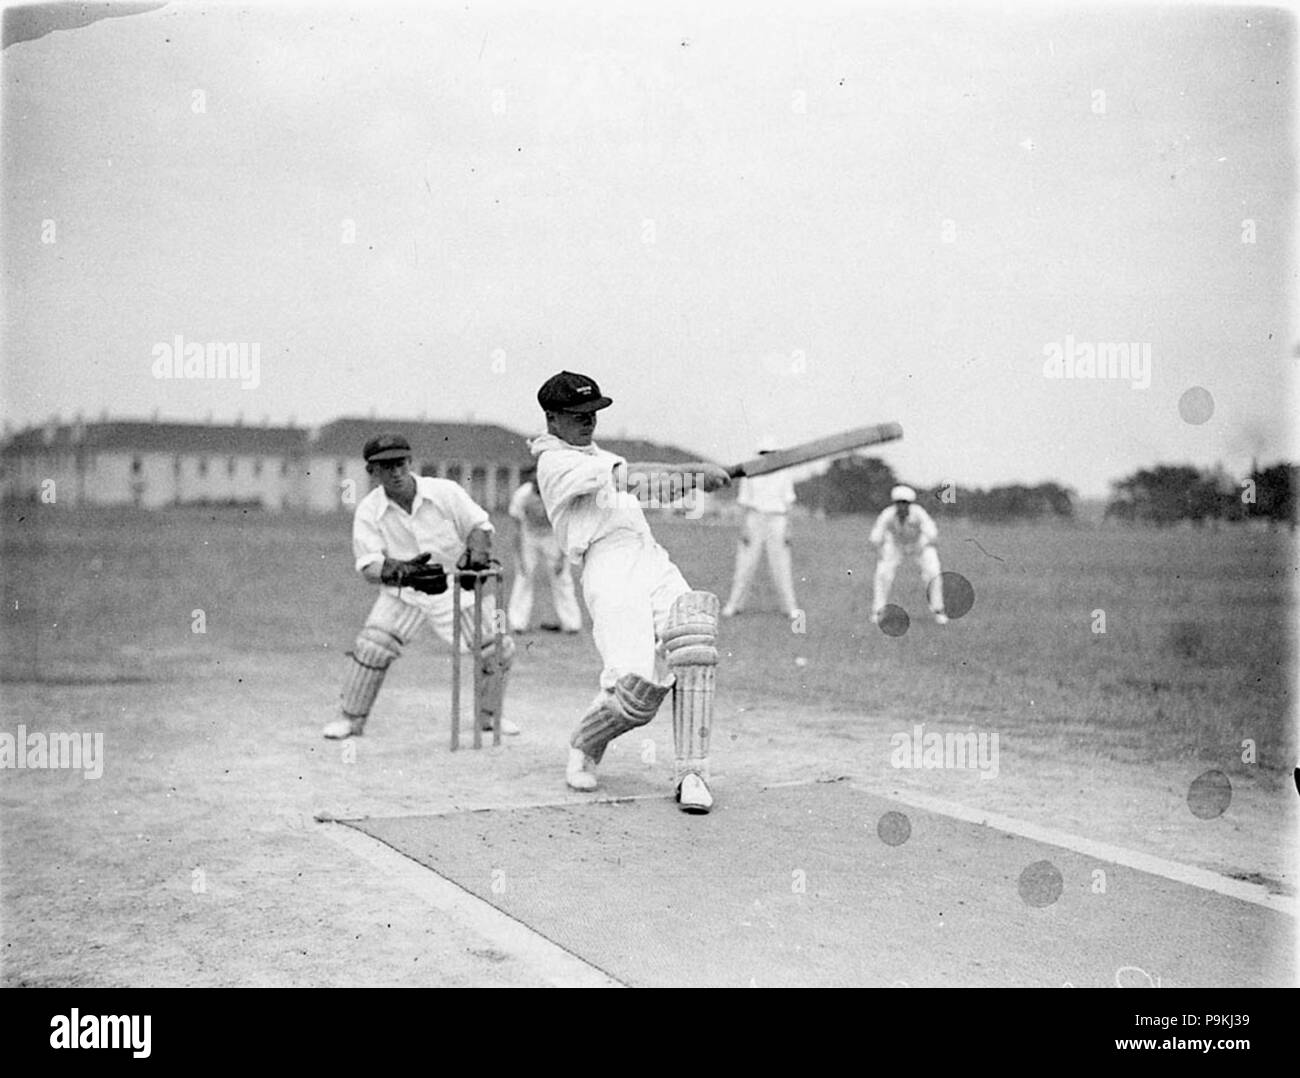 274 SLNSW 6720 Police cricket match at Moore Park Stock Photo